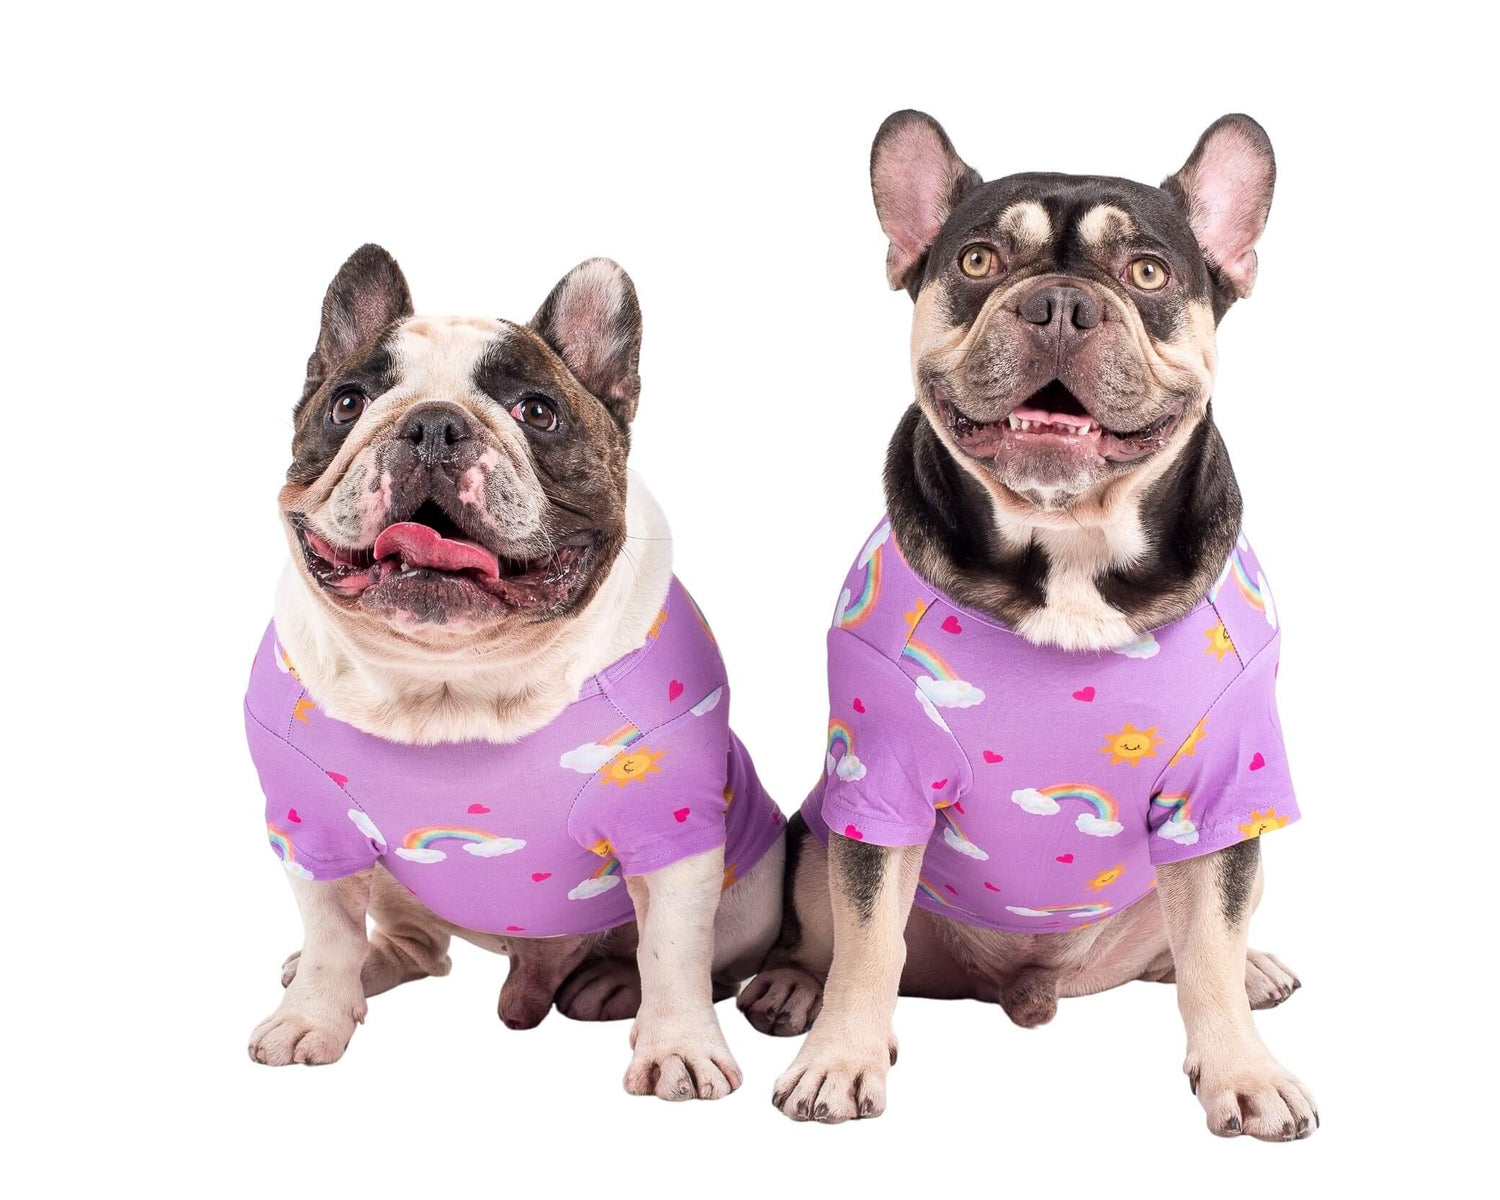 Two French Bulldogs wearing Vibrant Hound's Chasing Rainbow pyjamas for dogs. The dog shirt is purple with rainbows, bright suns, and love hearts printed on it.